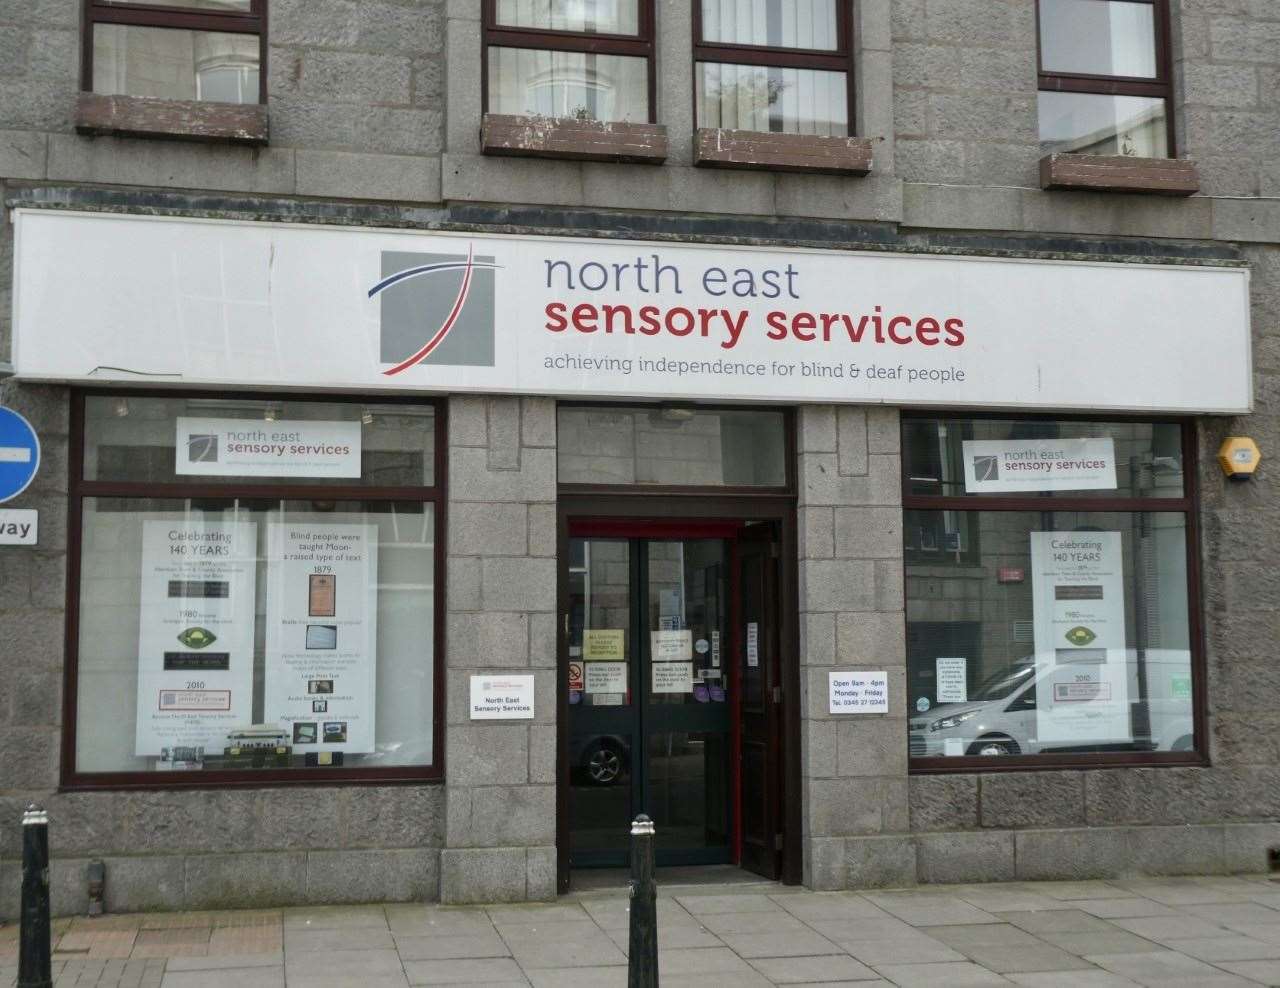 Classes will begin this month at The North East Sensory Services Aberdeen centre, based at 21 John Street.